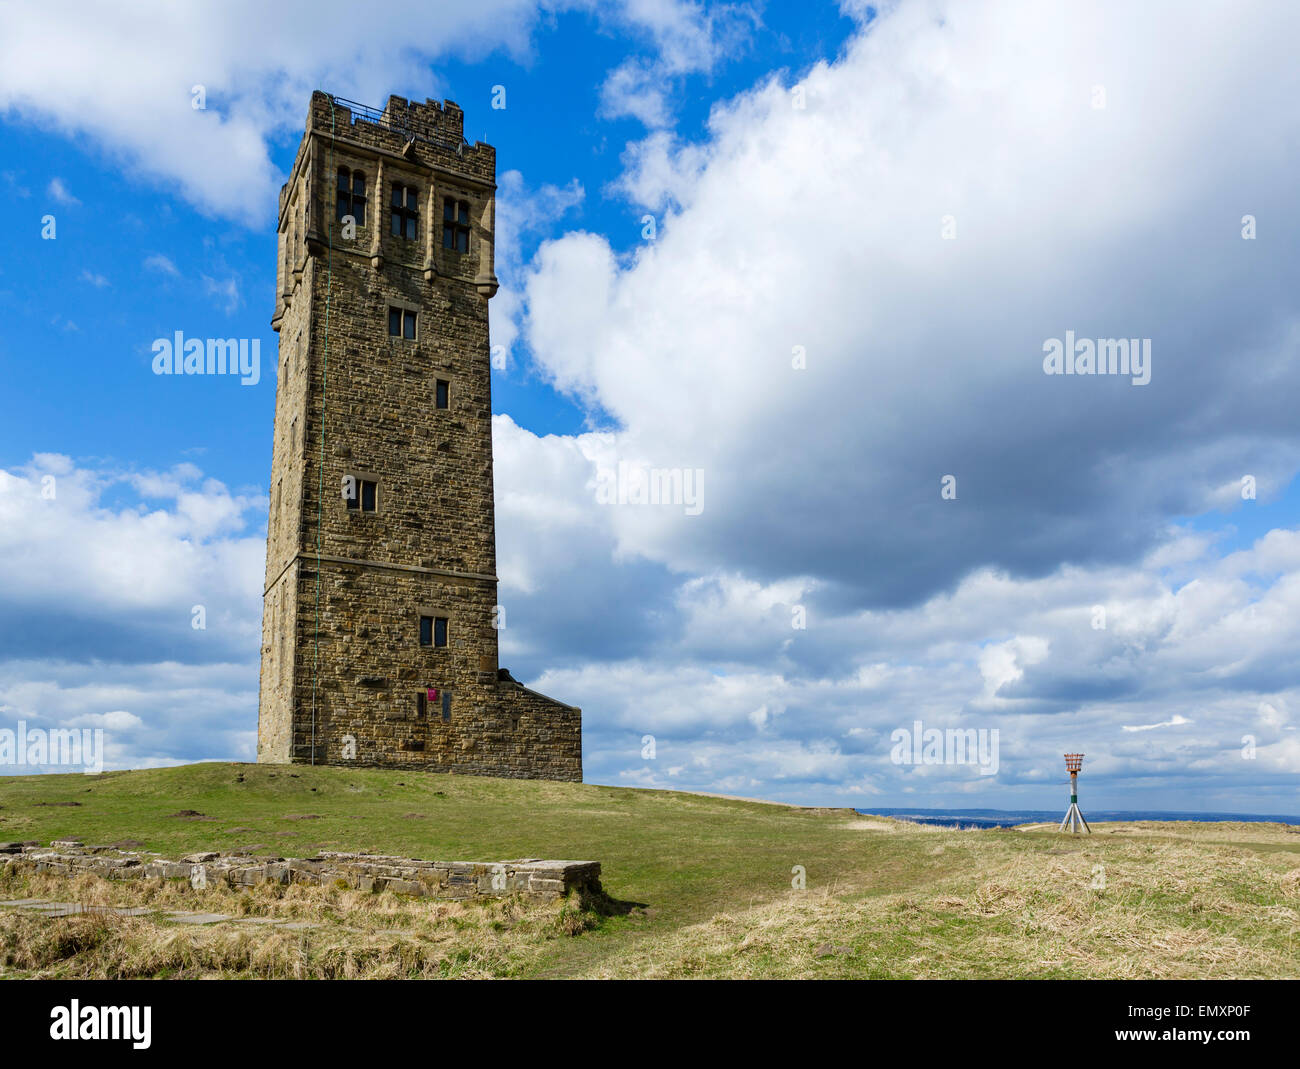 Jubilee or Victoria Tower on Castle Hill, Huddersfield, West Yorkshire, England Stock Photo